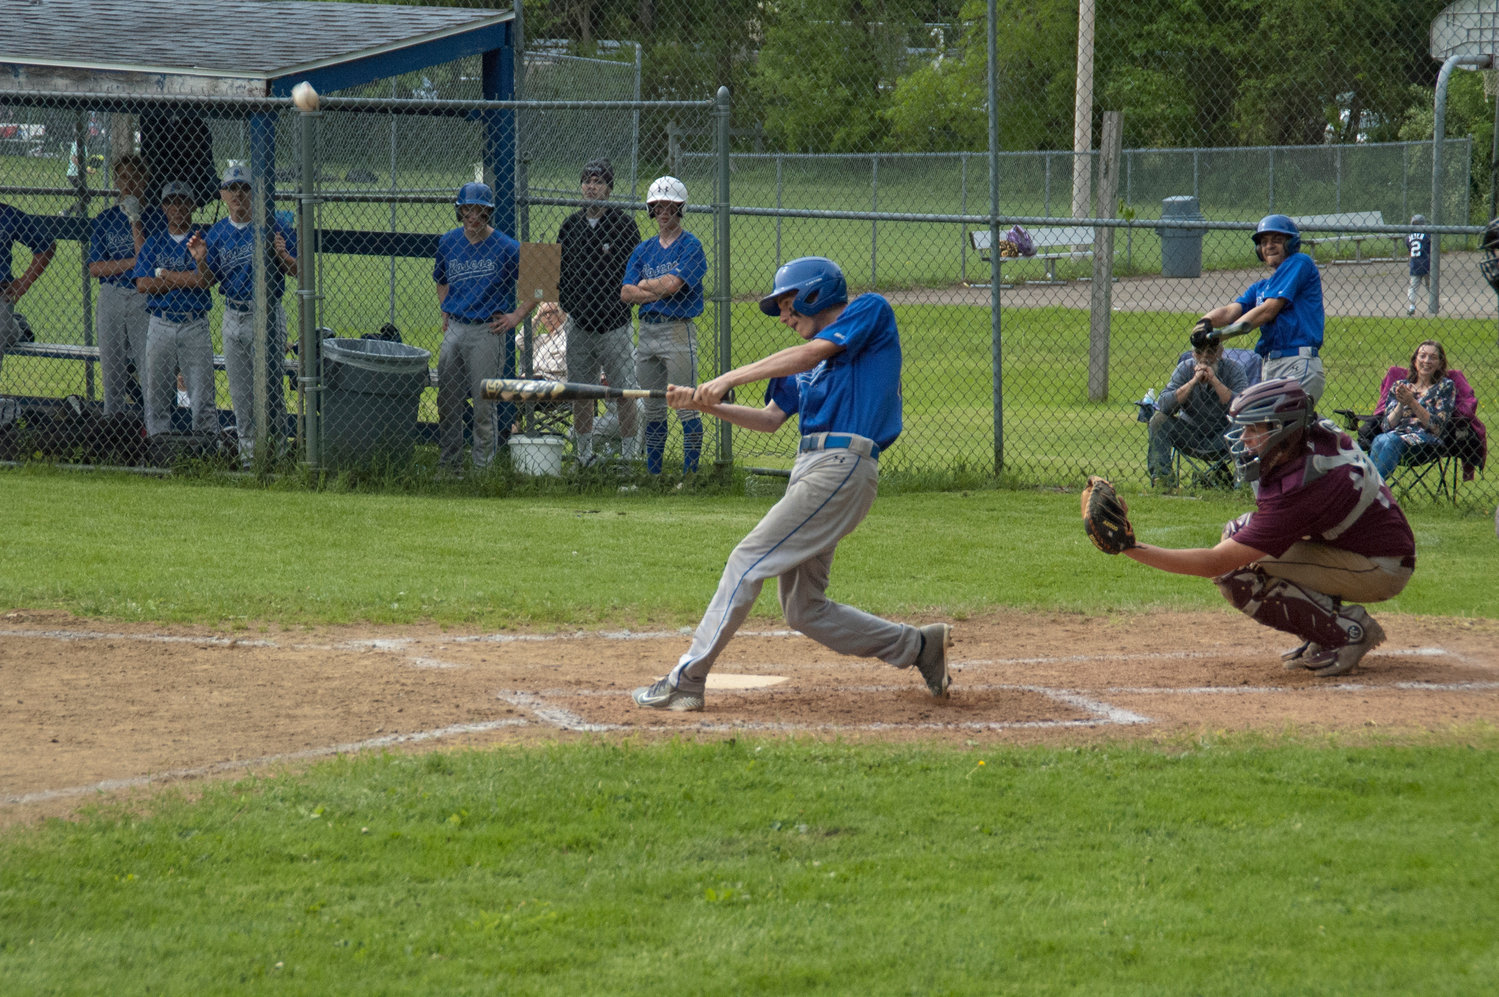 Anthony Zamenick drives a ball into deep left field and drives in two early runs for the Blue Devils.